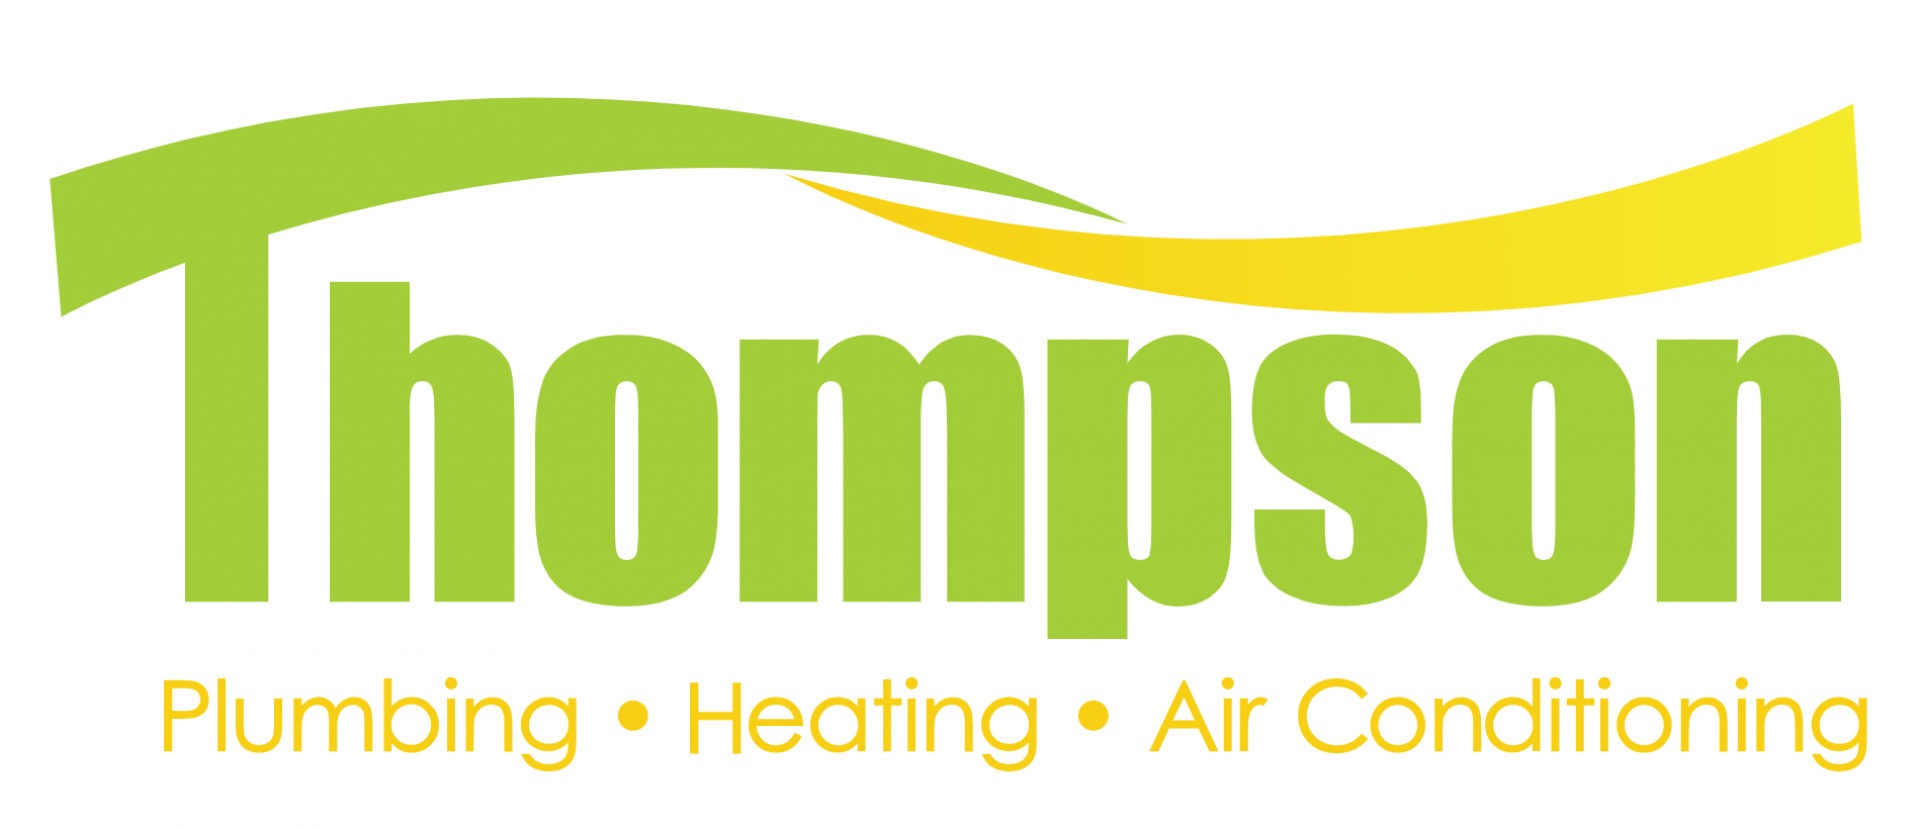 Thompson Plumbing Heating and Air Conditioning company logo